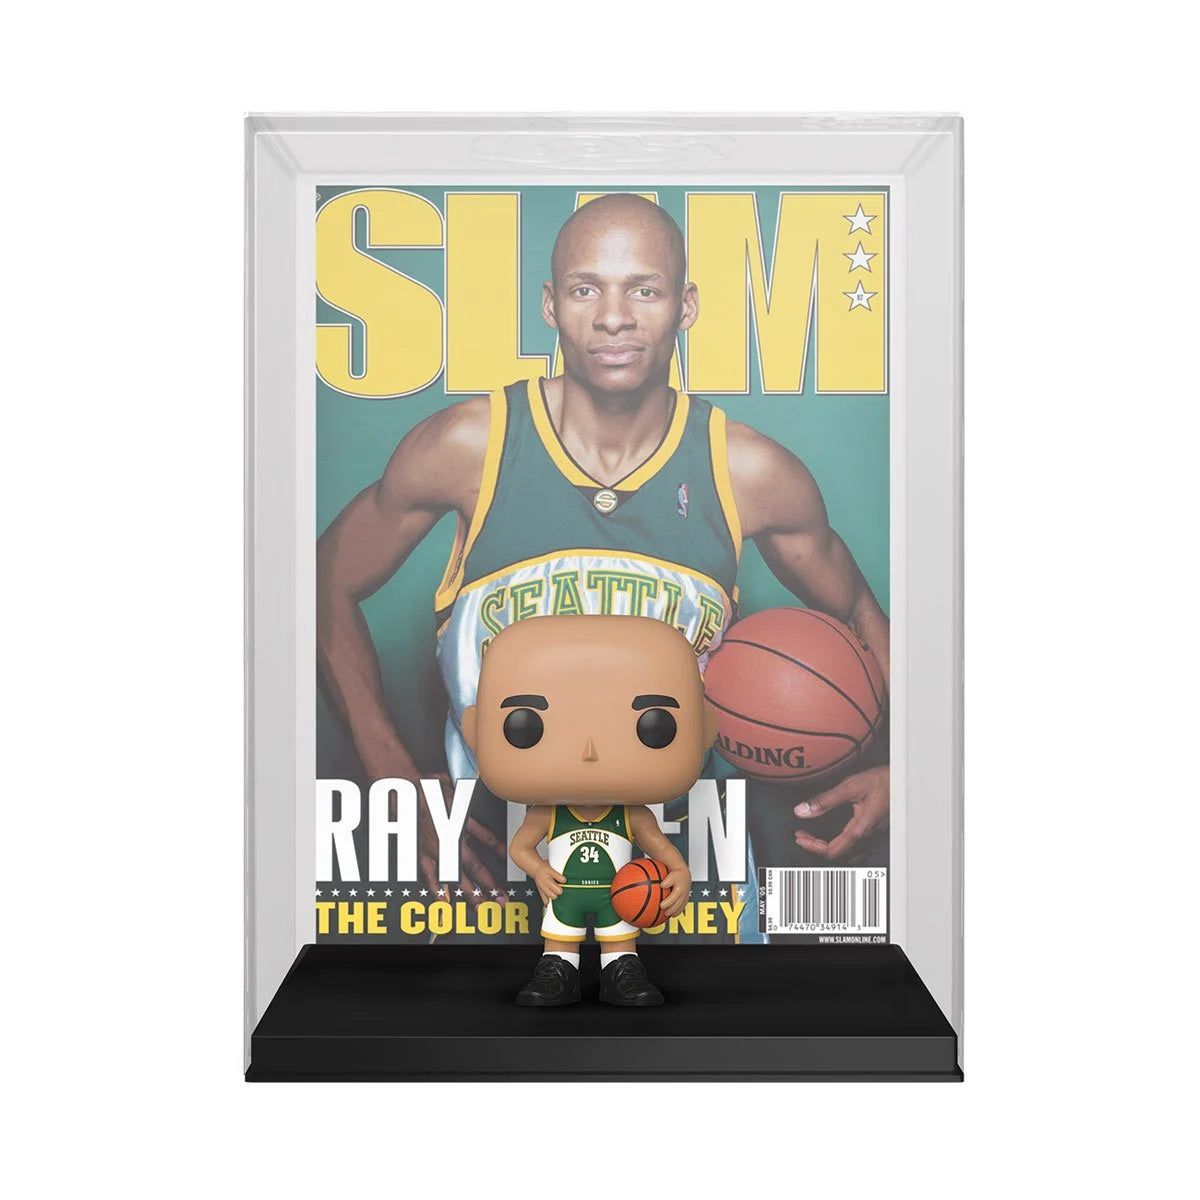 Ray Allen NBA SLAM Pop! Cover Figure with Case